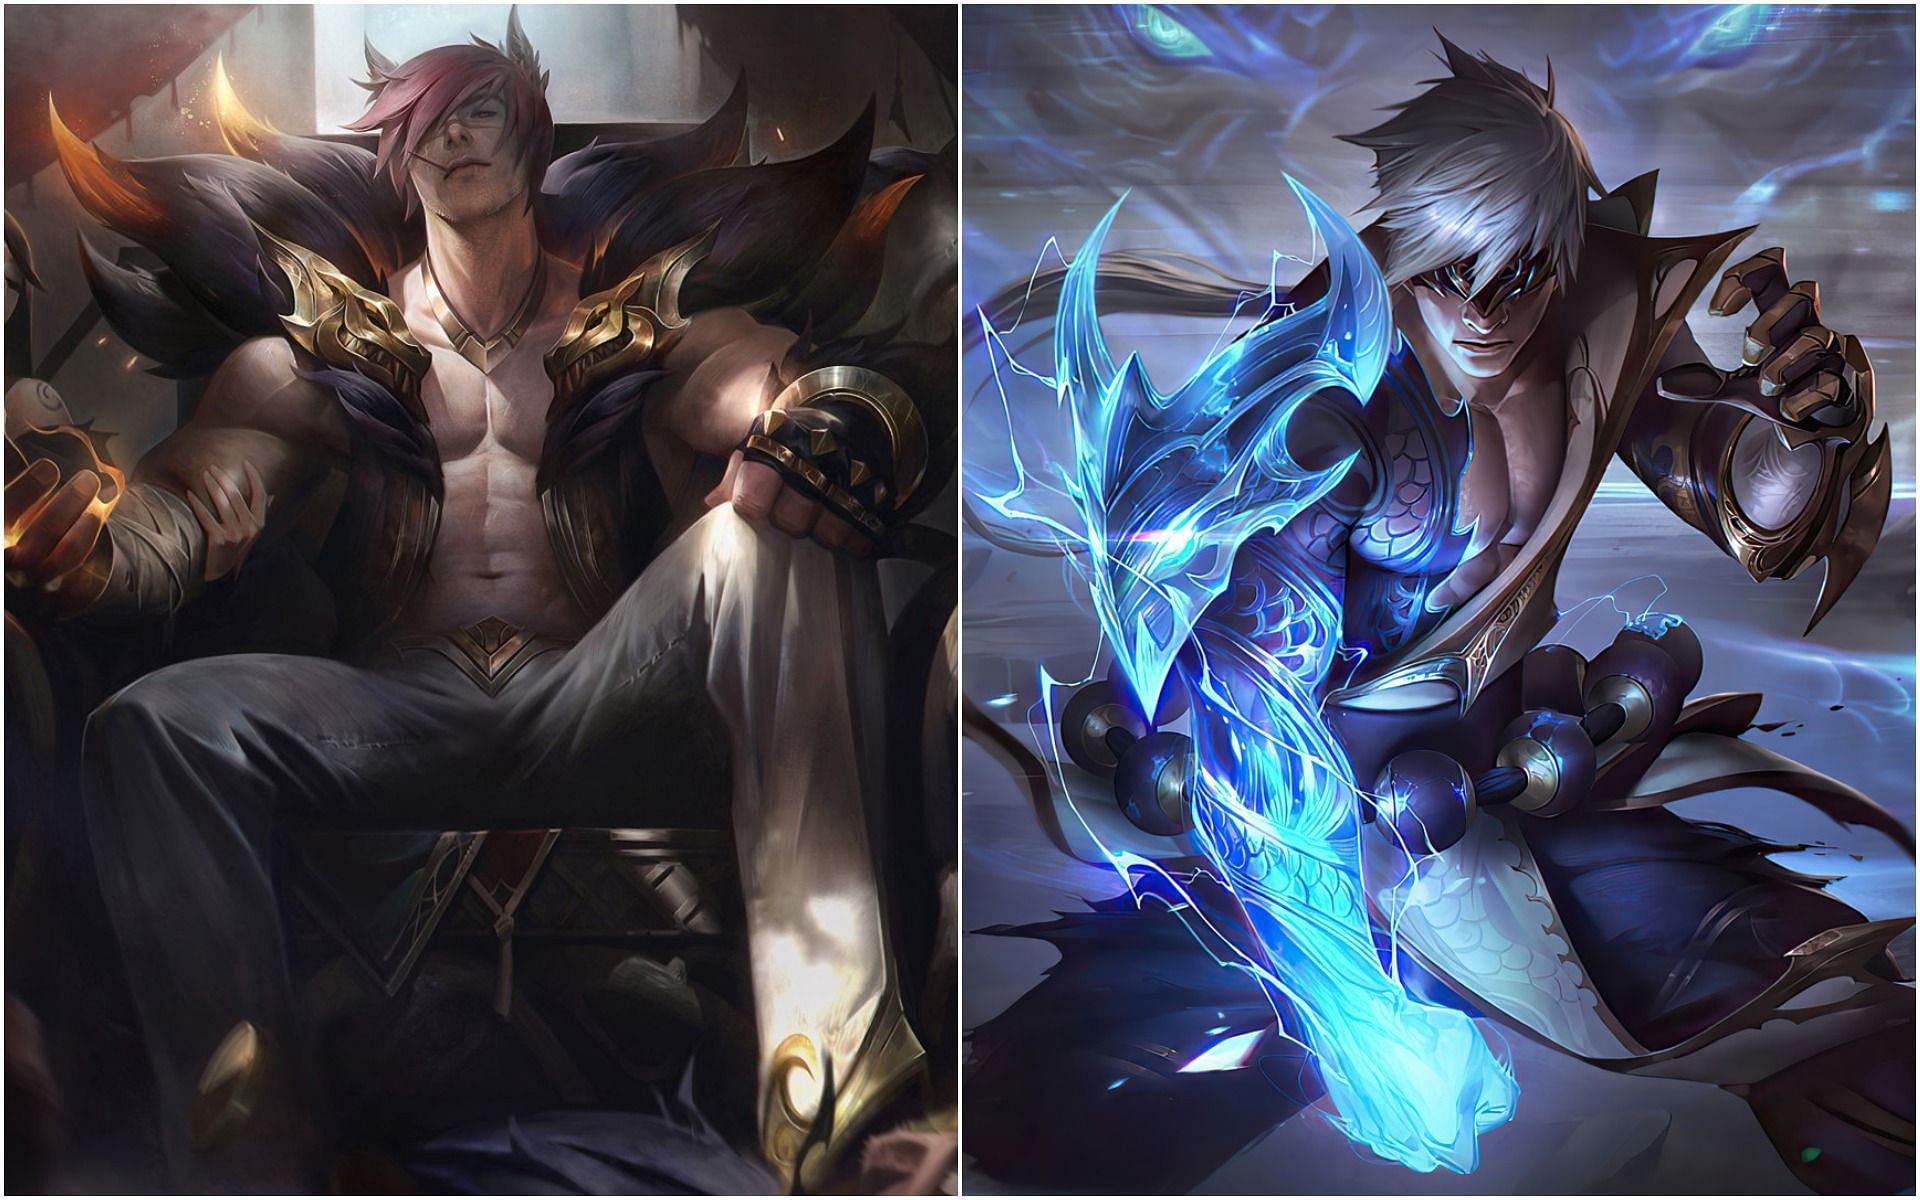 Lee Sin and Sett will be perfect champions to become part of Project L (Image via League of Legends)